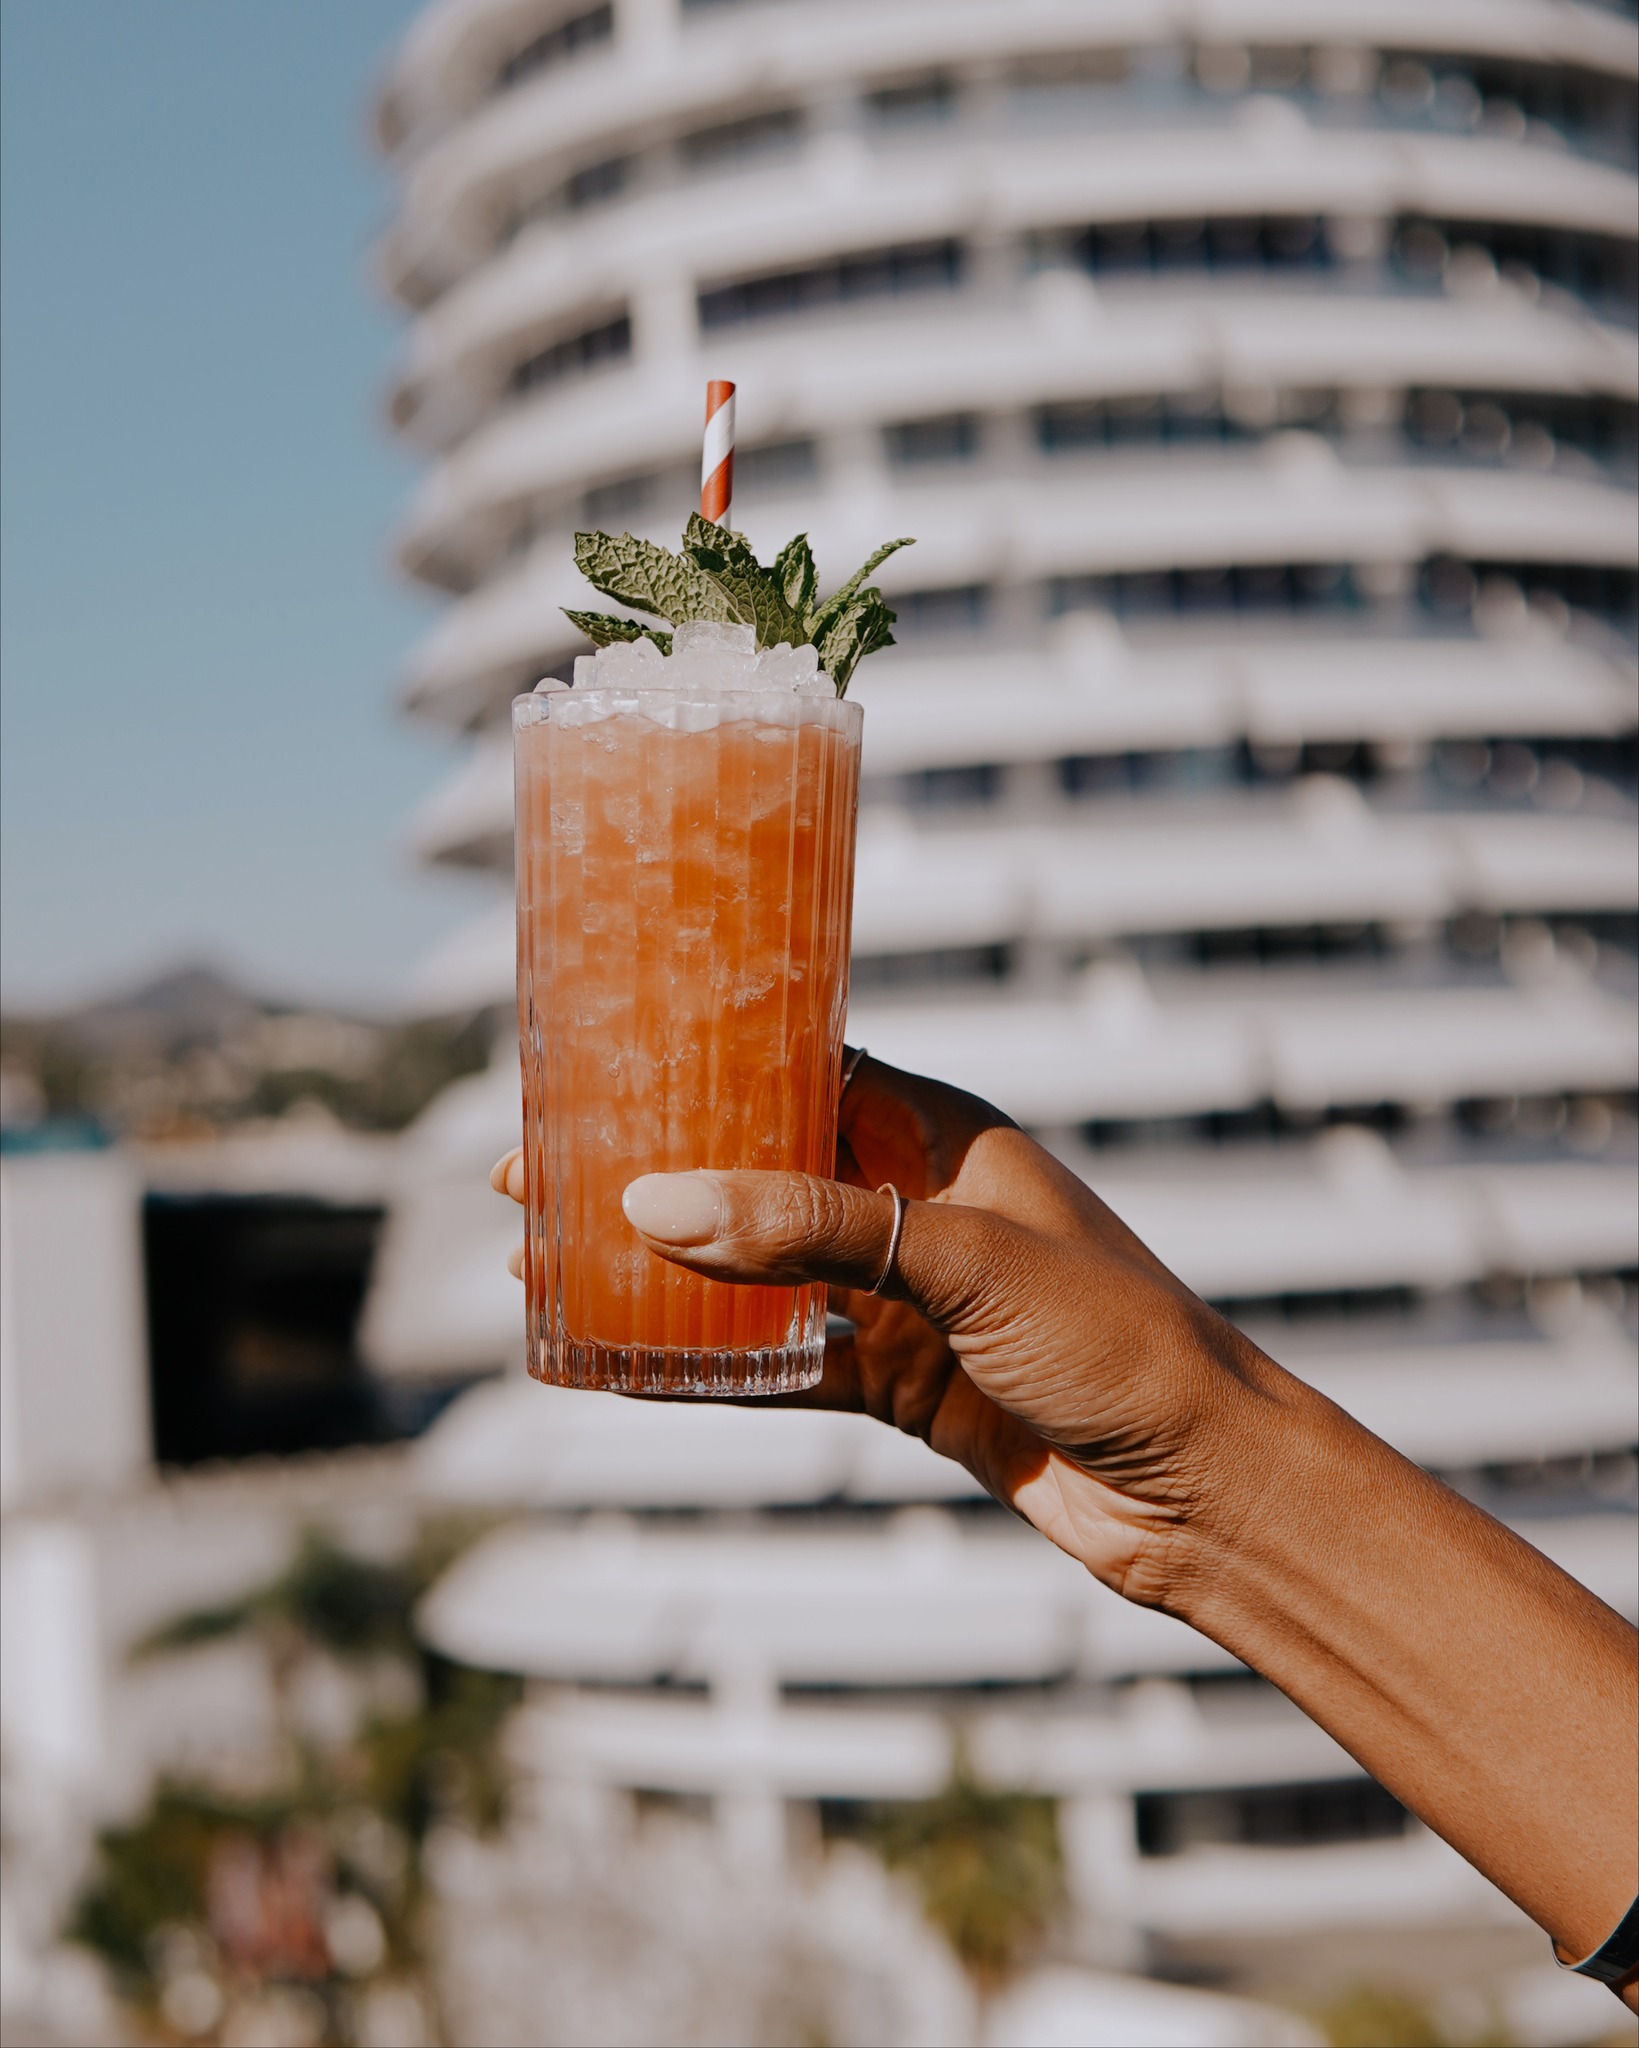 A cocktail at the Lemon Grove rooftop restaurant overlooking the Capitol Records Building.